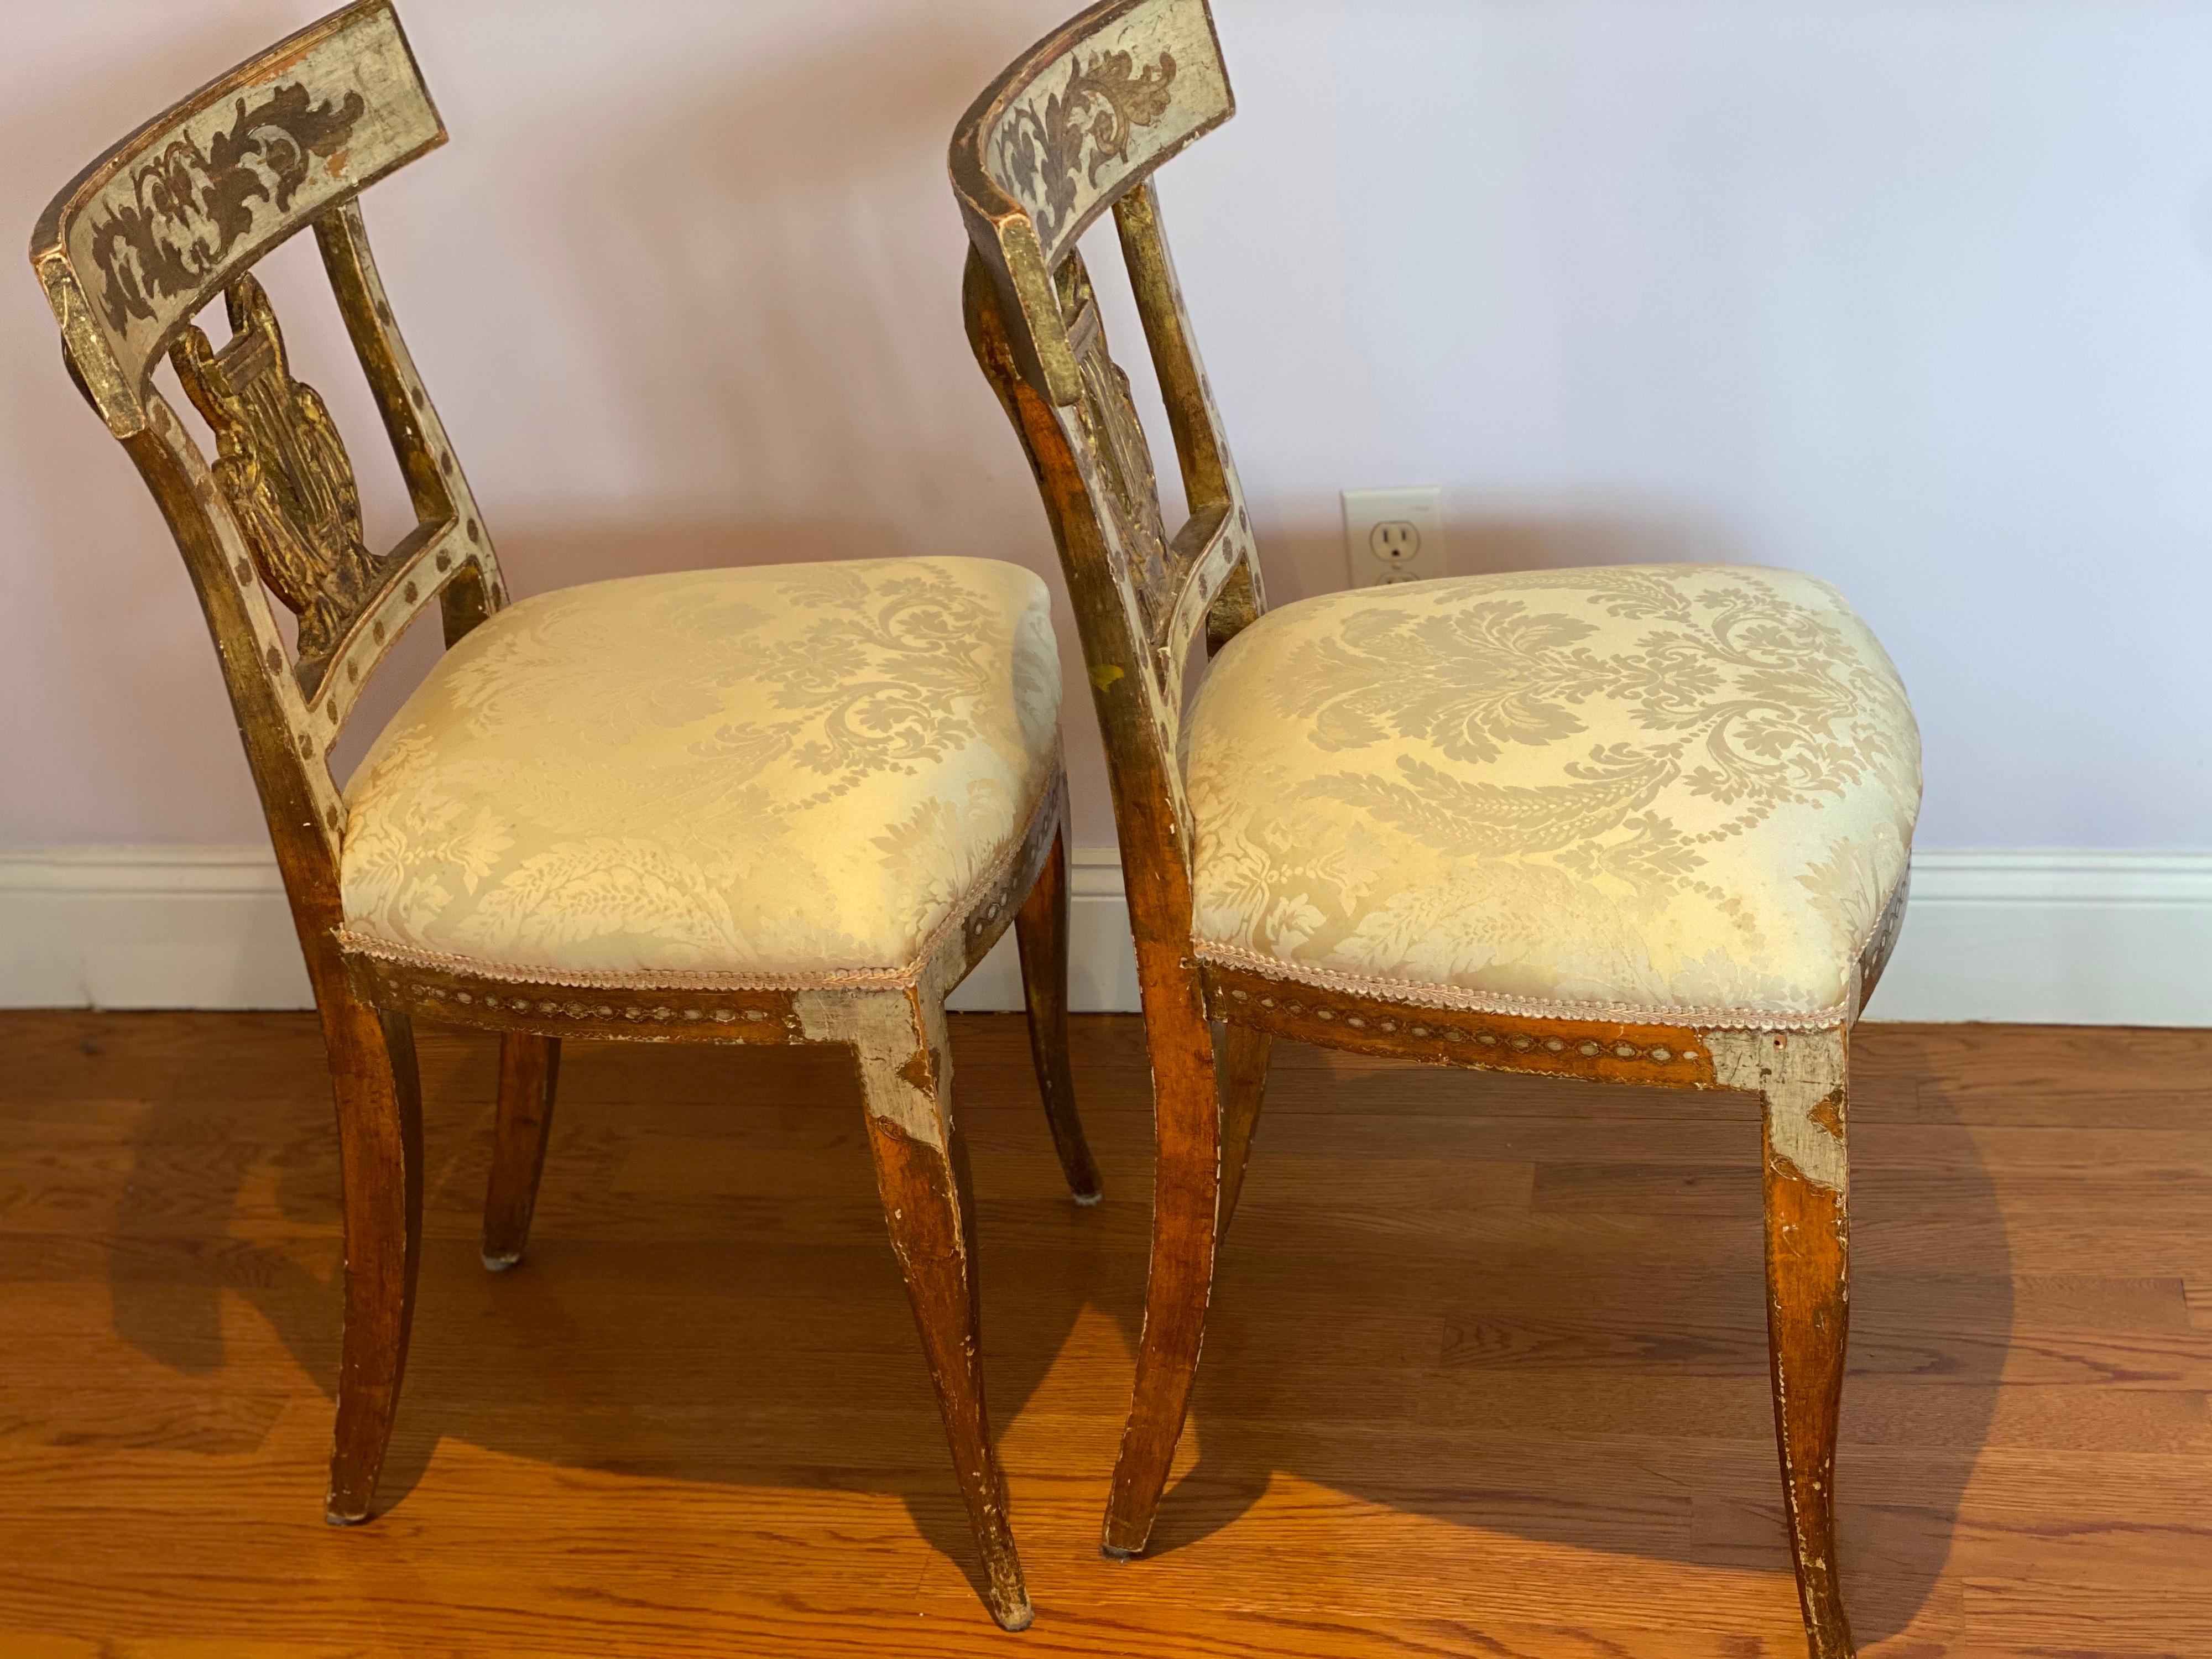 19th Century Pair of Italian Neoclassical Gilt-Wood Side Chairs with Swans and Lyres For Sale